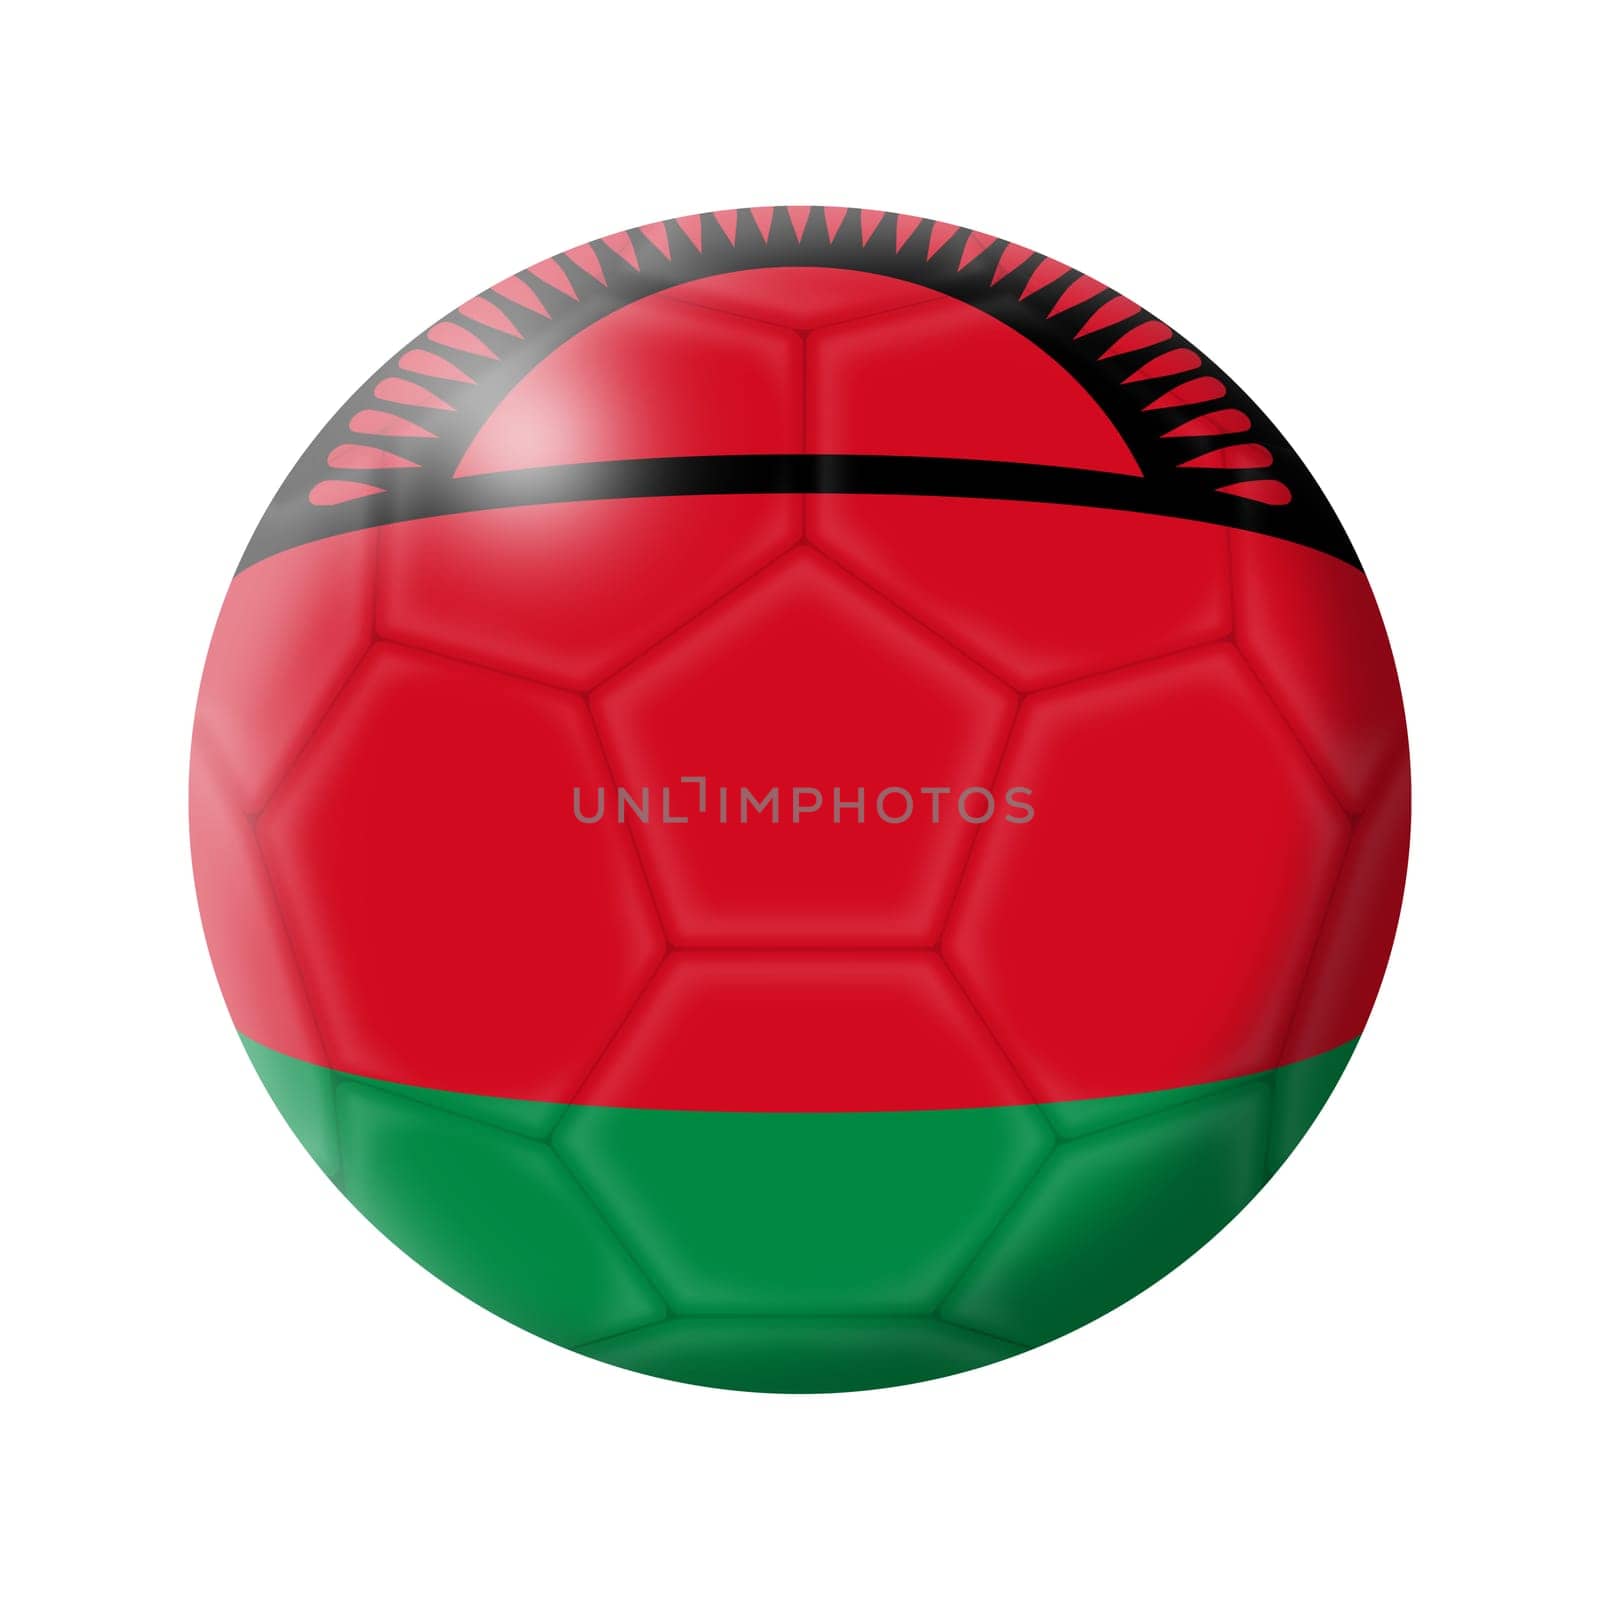 A Malawi soccer ball football 3d illustration isolated on white with clipping path